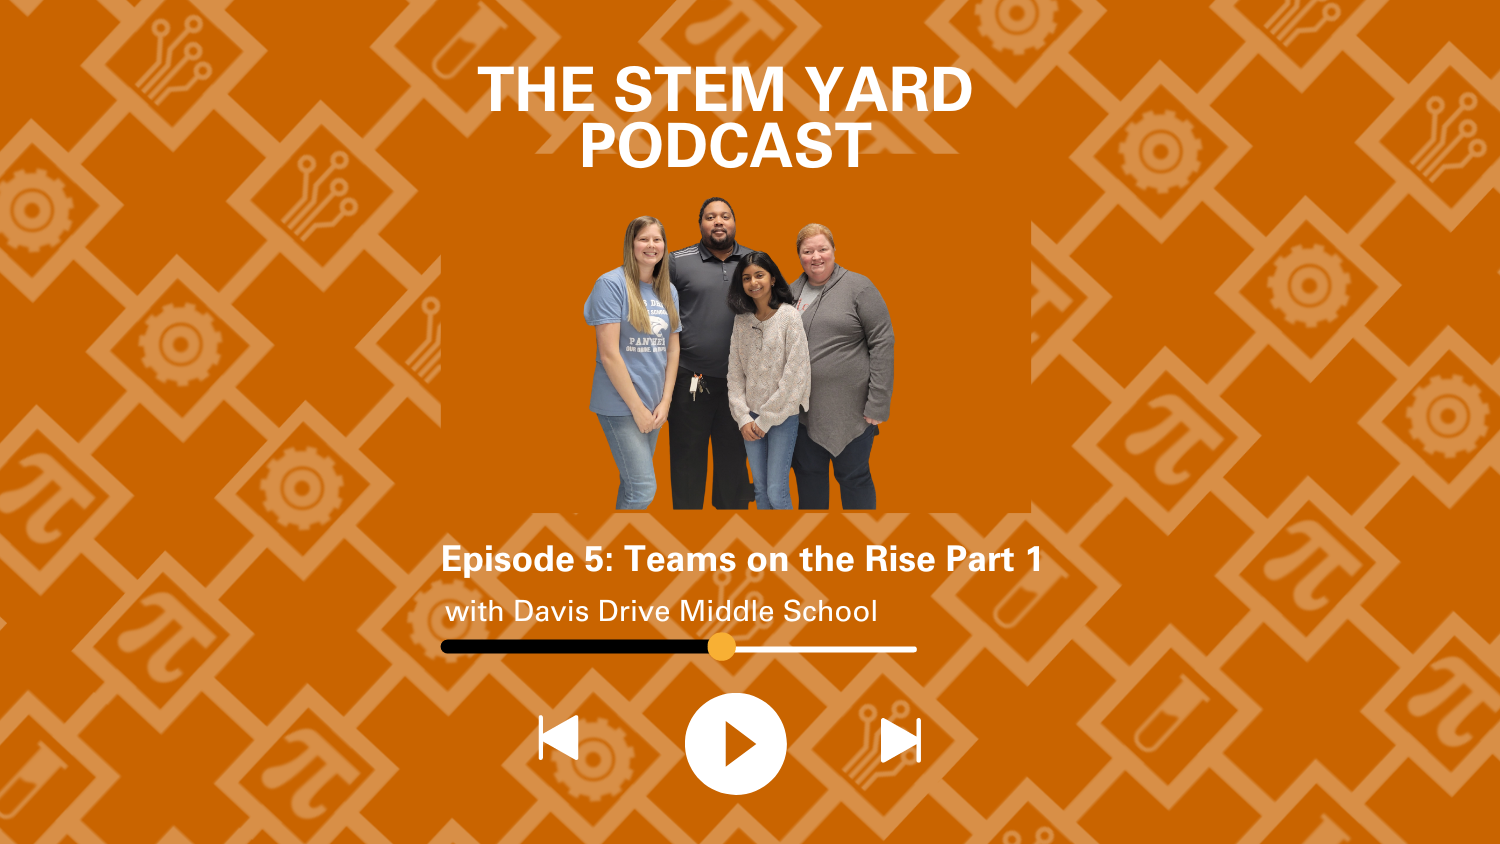 Episode 5 - Teams on the Rise Part 1 with Davis Drive Middle School